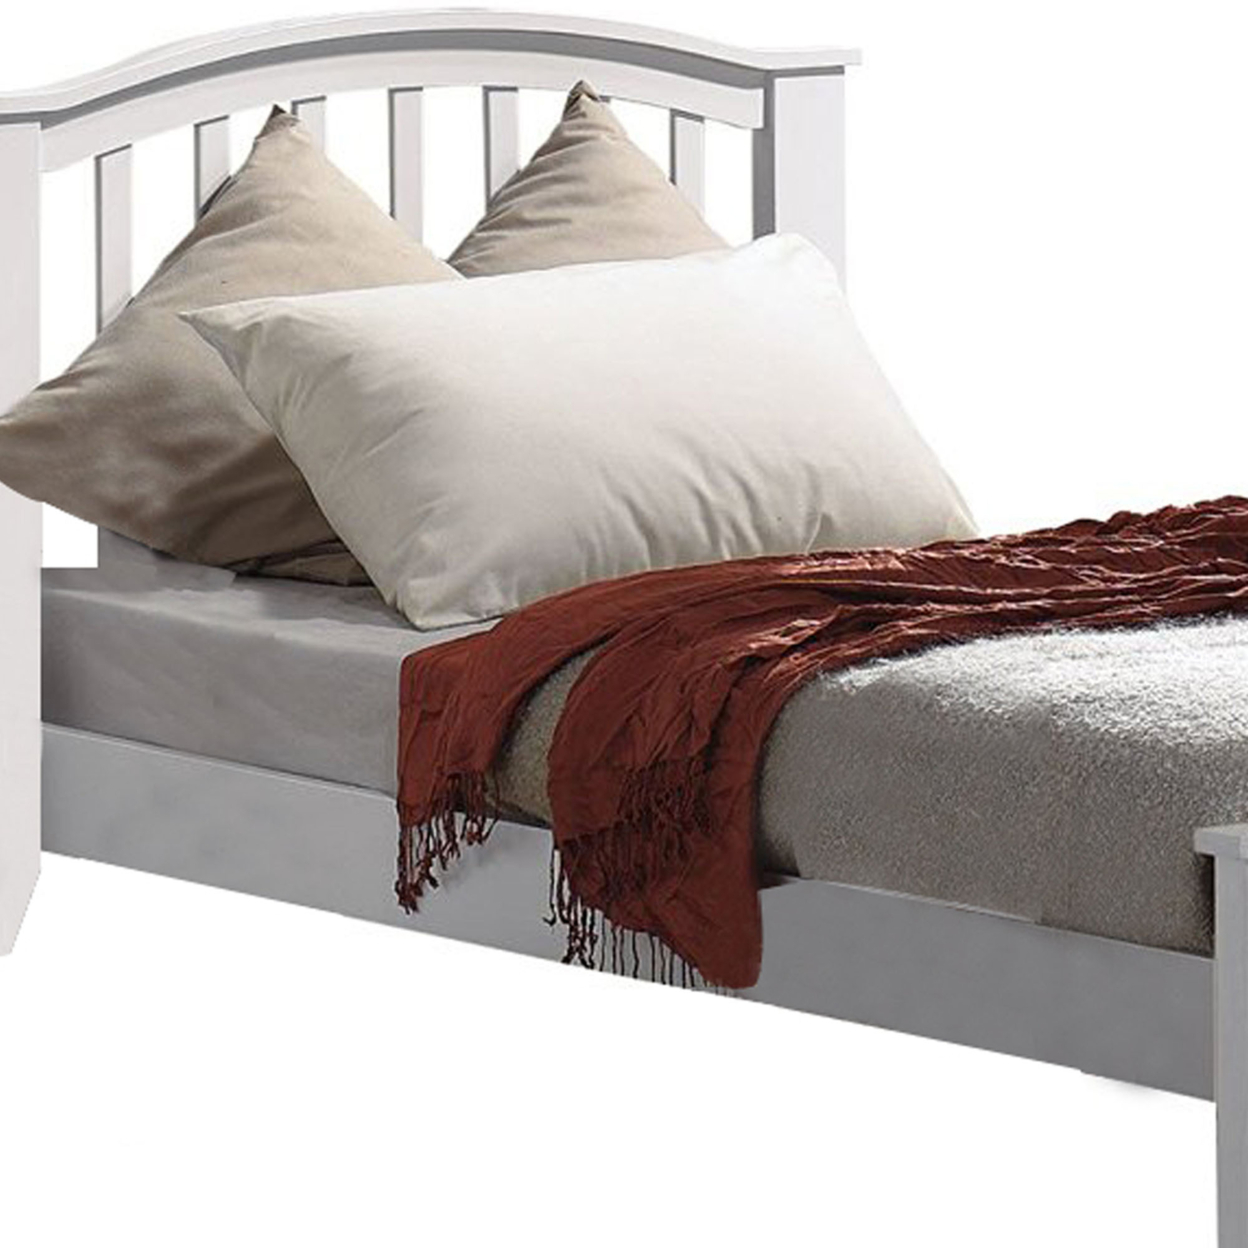 Mission Style Wooden Twin Bed With Arched Slatted Headboard And Footboard, White- Saltoro Sherpi